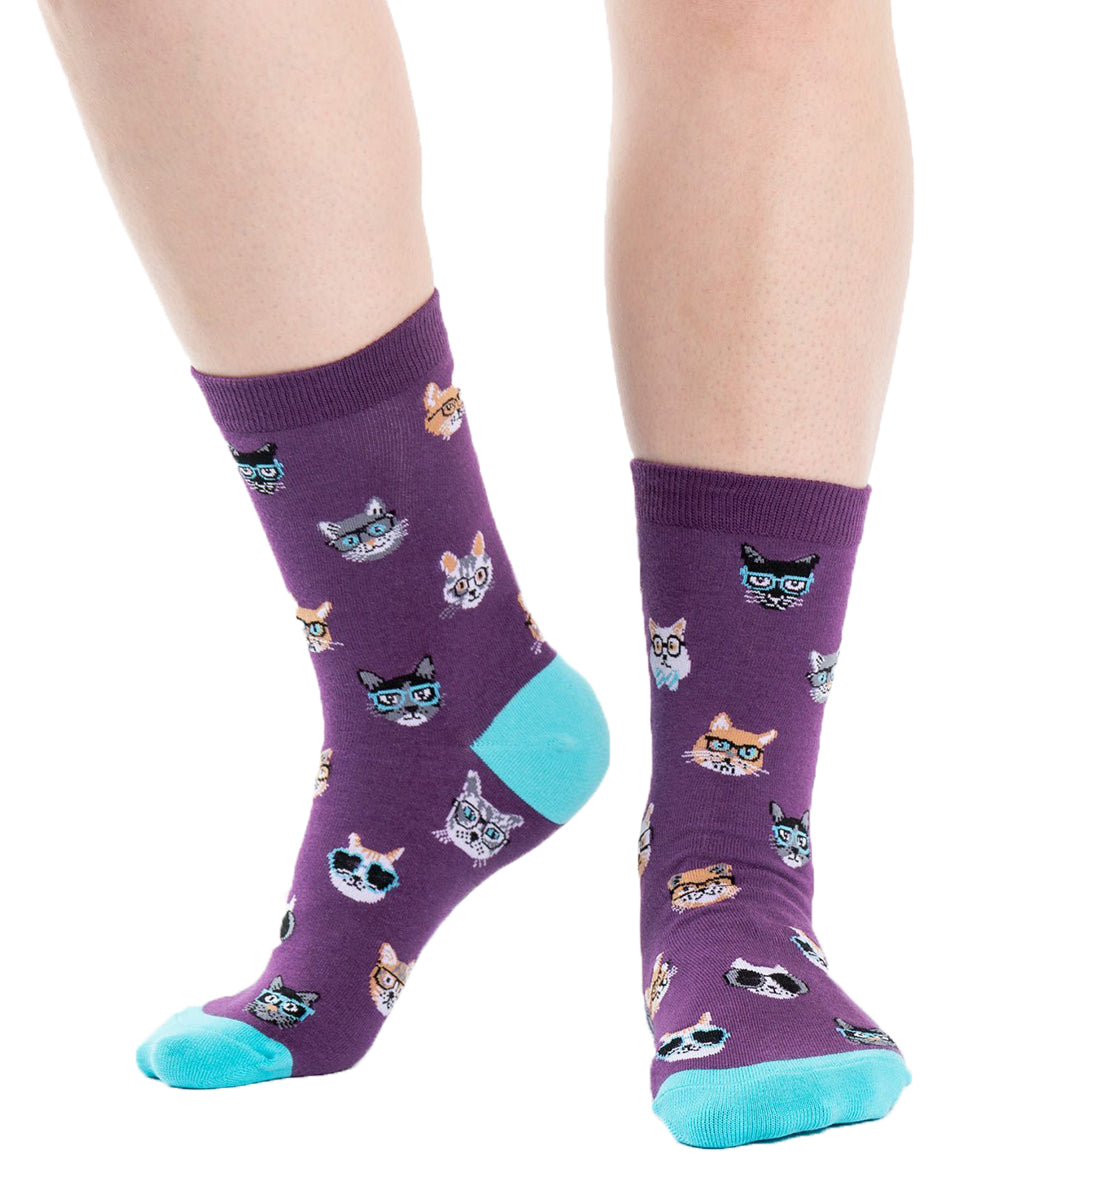 SOCK it to me Women's Crew Socks (w0090)- Smarty Cats - Smarty Cats,One Size